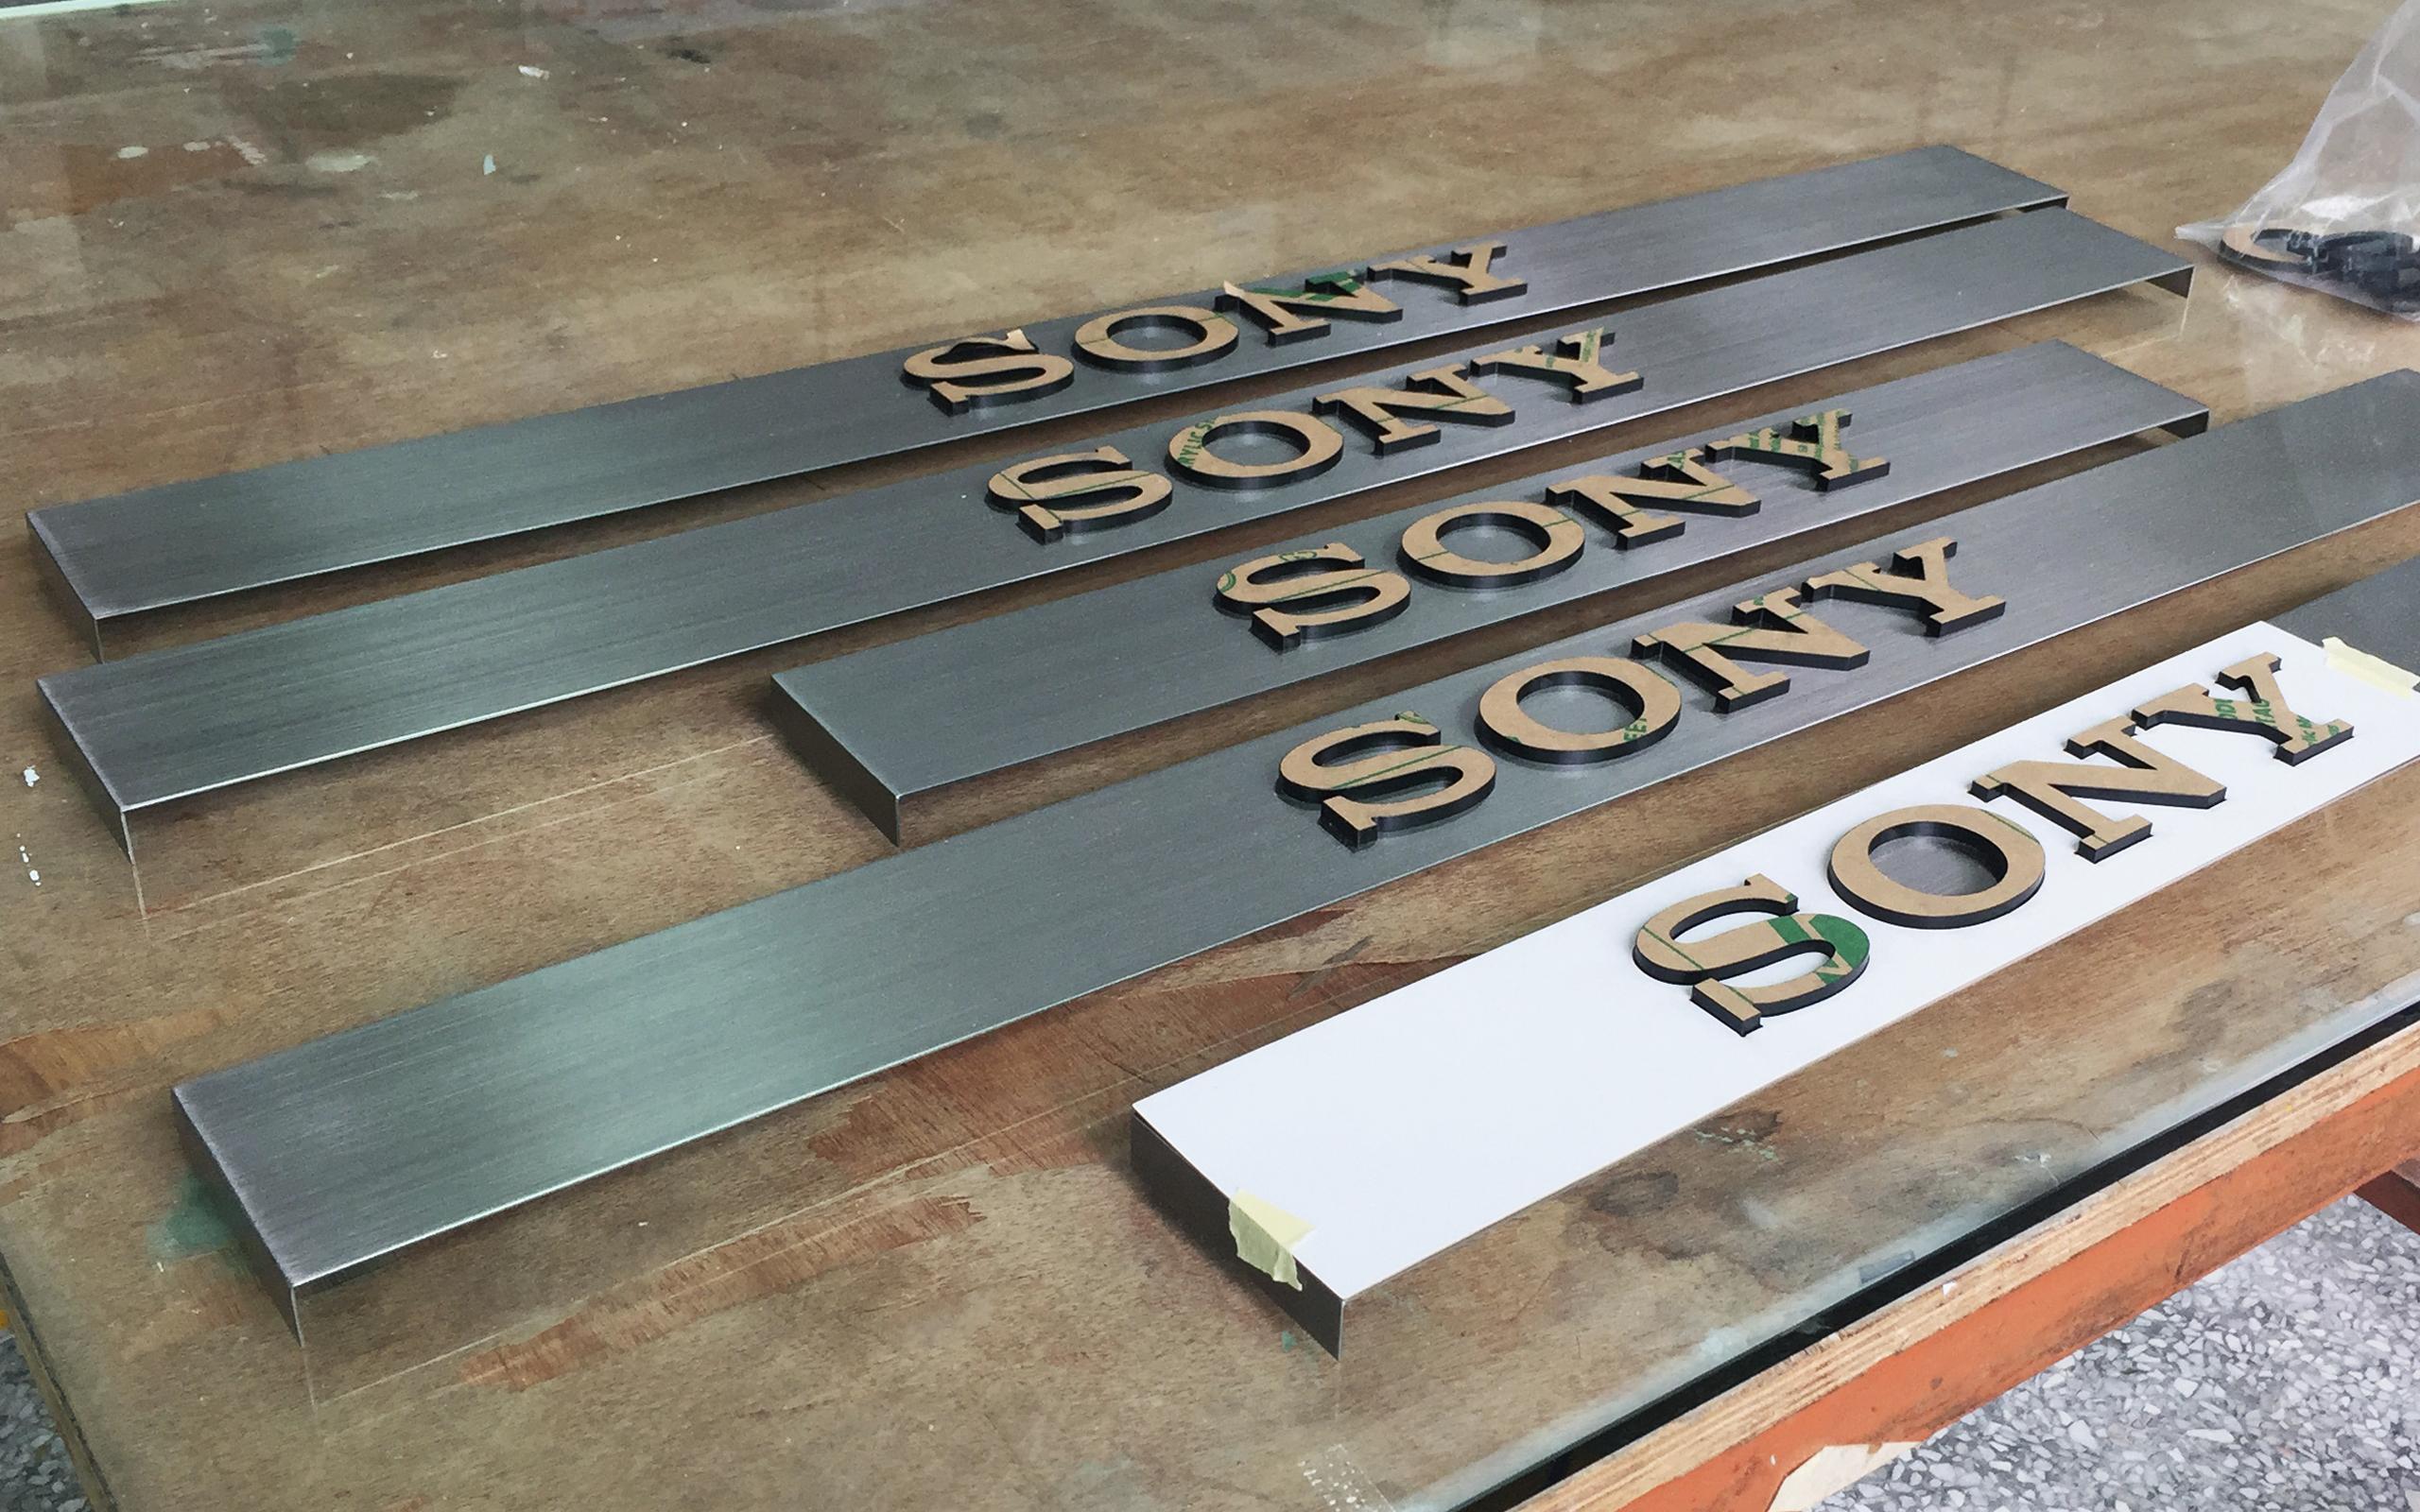 sony logo on fabricated brushed stainless steel panels